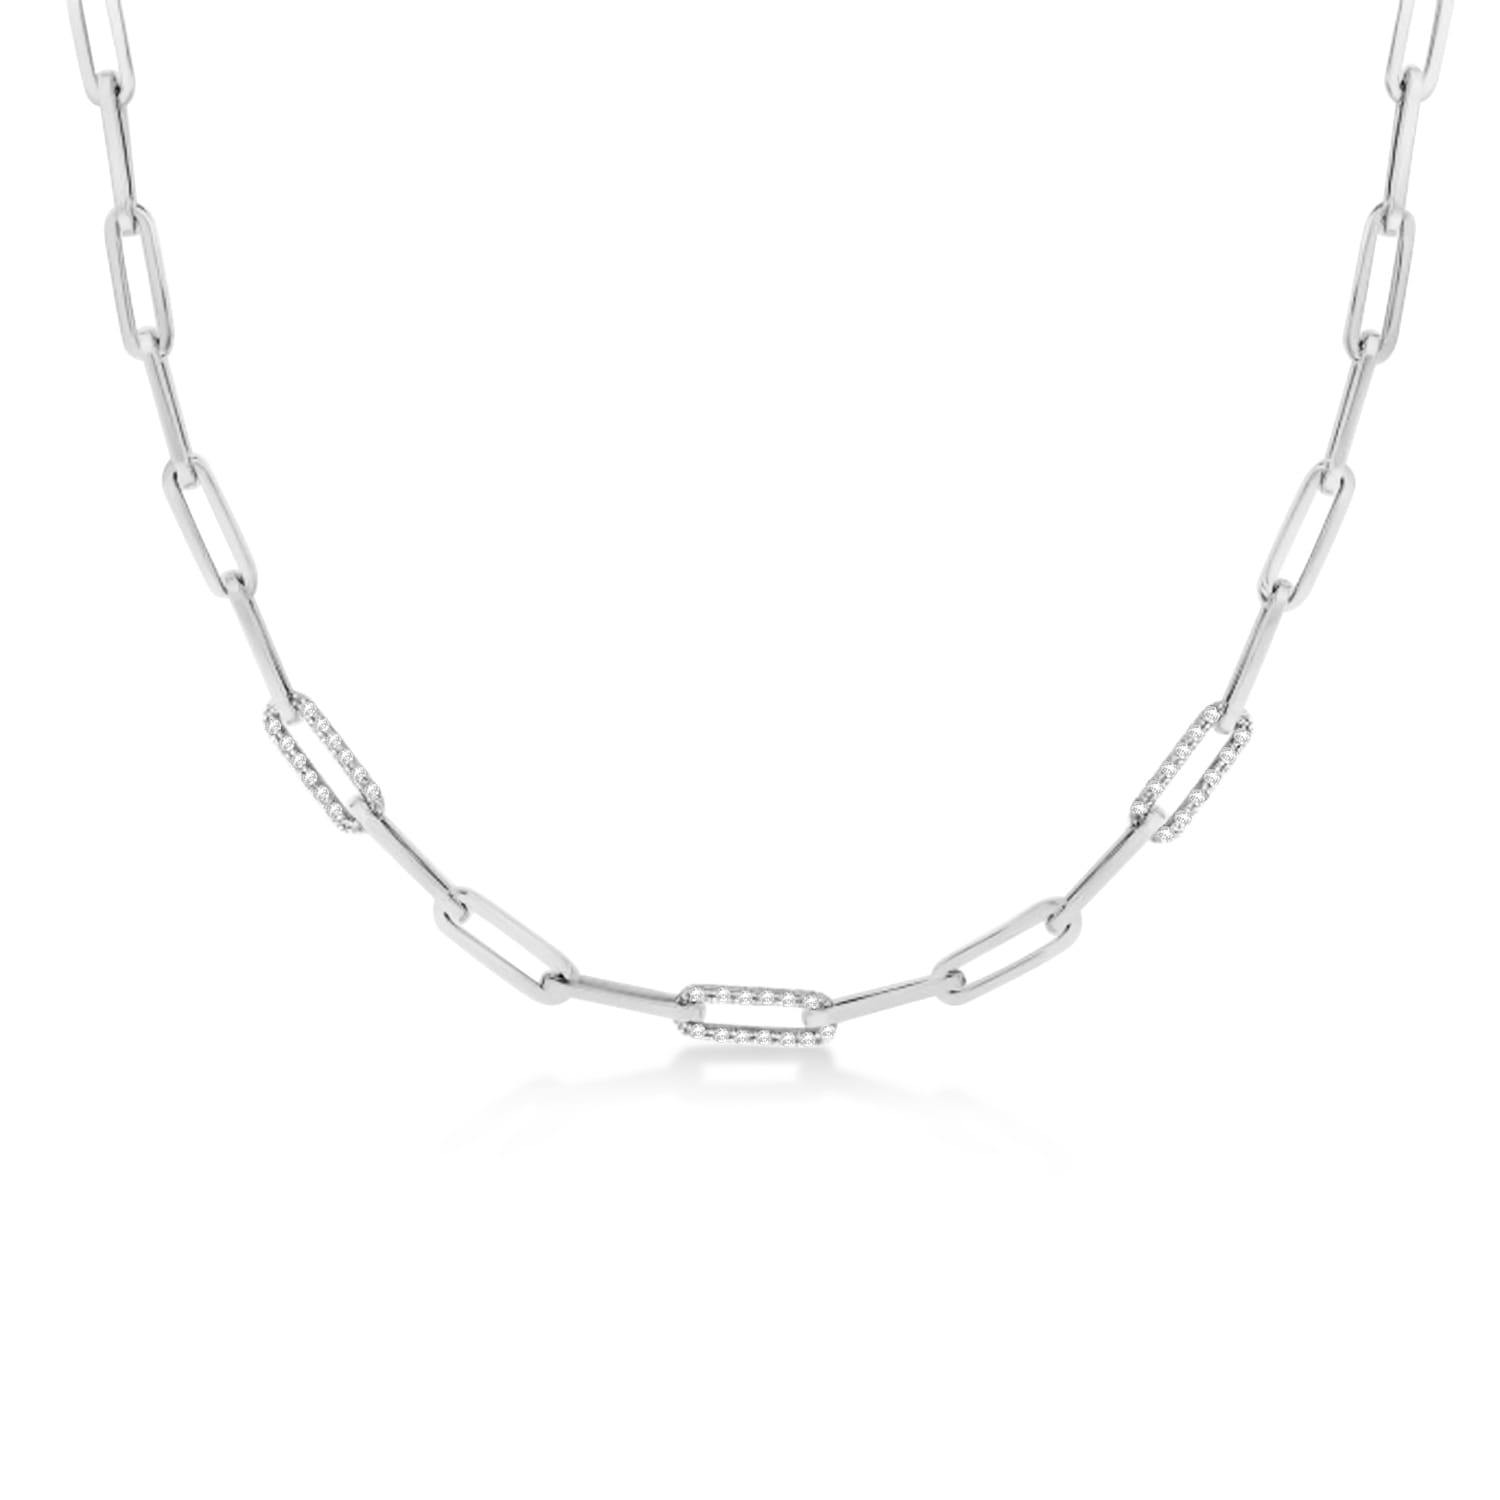 Diamond Paperclip Chain Necklace 14k White Gold (0.96ct)